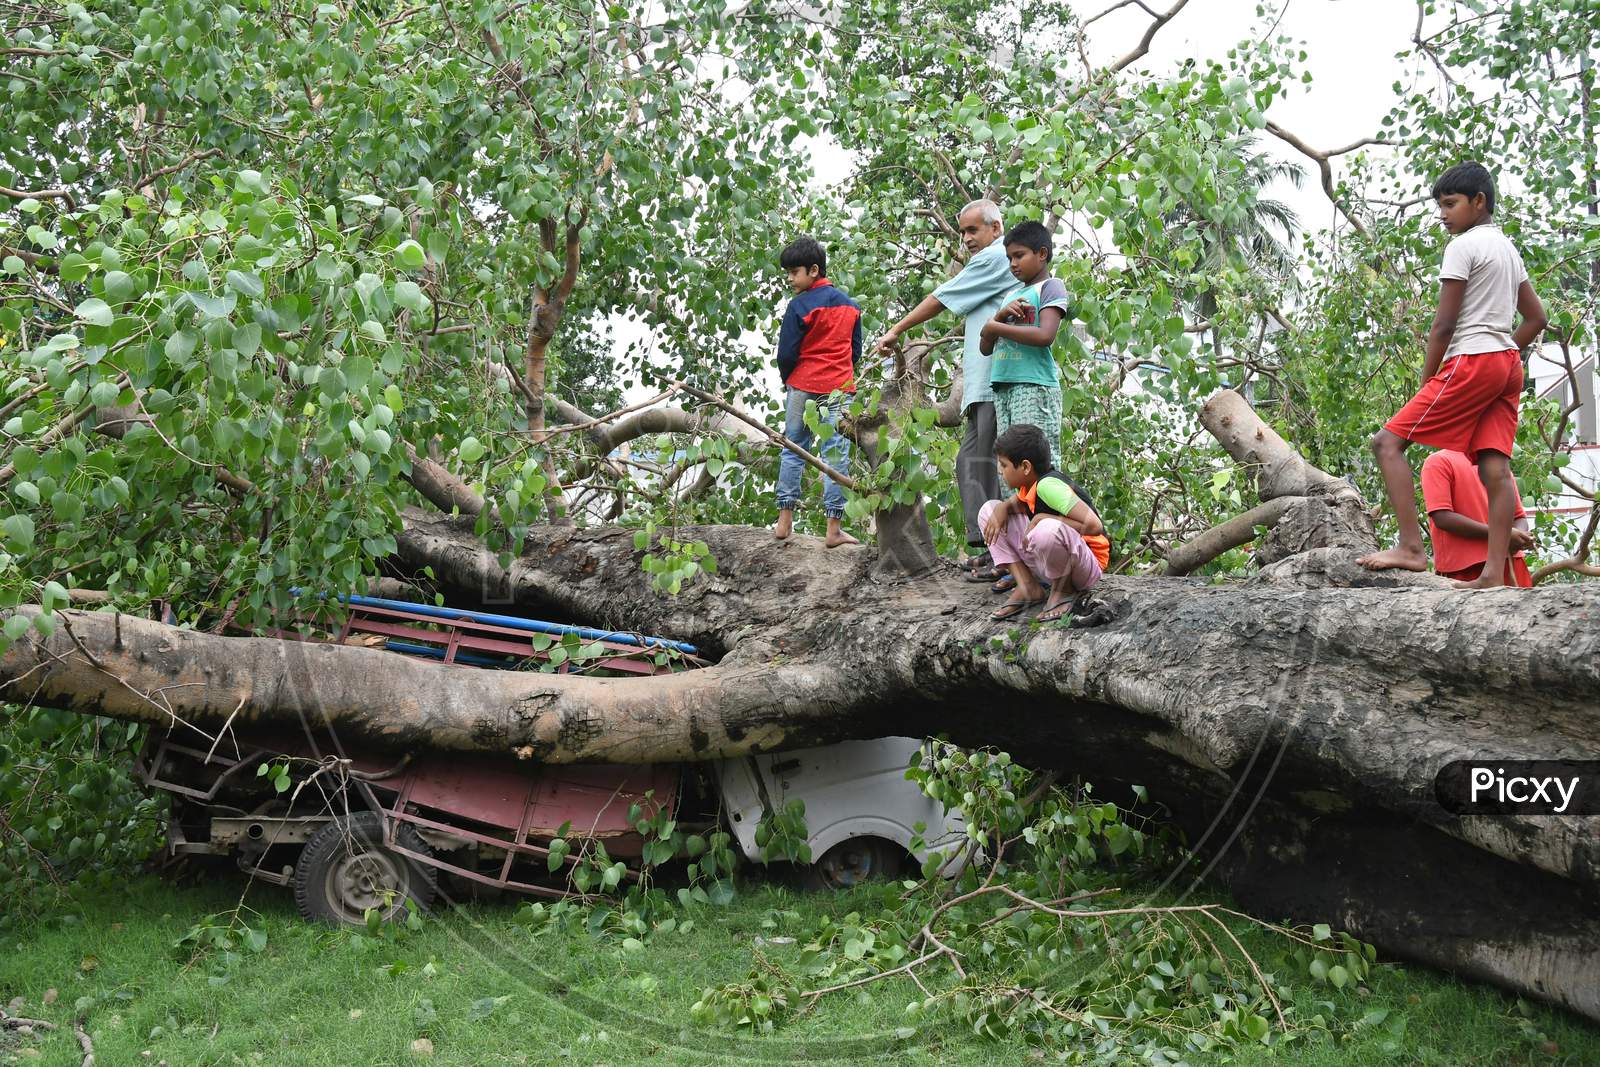 Car crushed under the burden of an uprooted tree during Wednesday's (20.05.2020) Cyclone Amphan in Burdwan town.